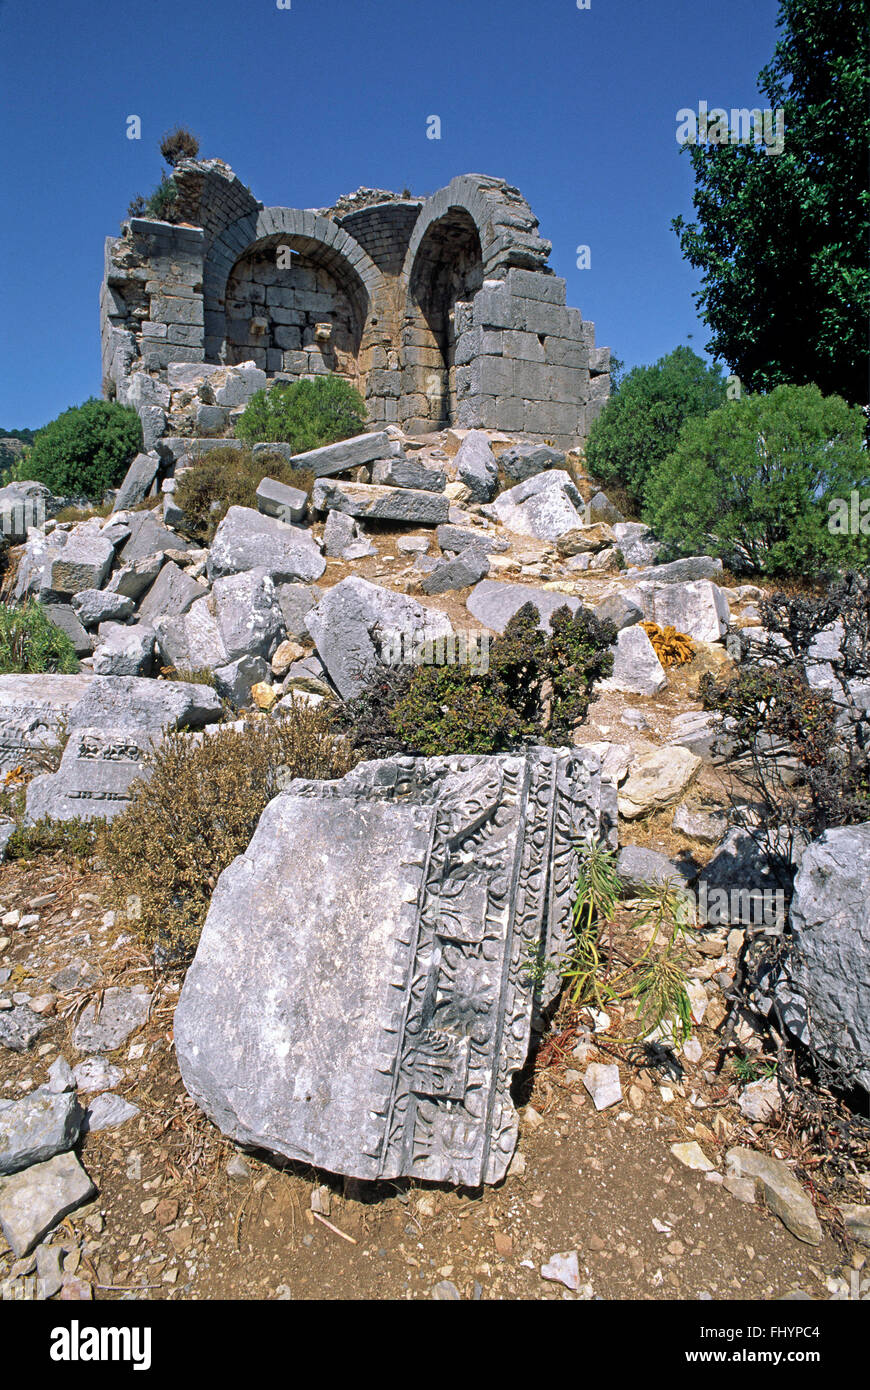 One of the Ruined Tombs of Lydae - TURQUOISE COAST, TURKEY Stock Photo